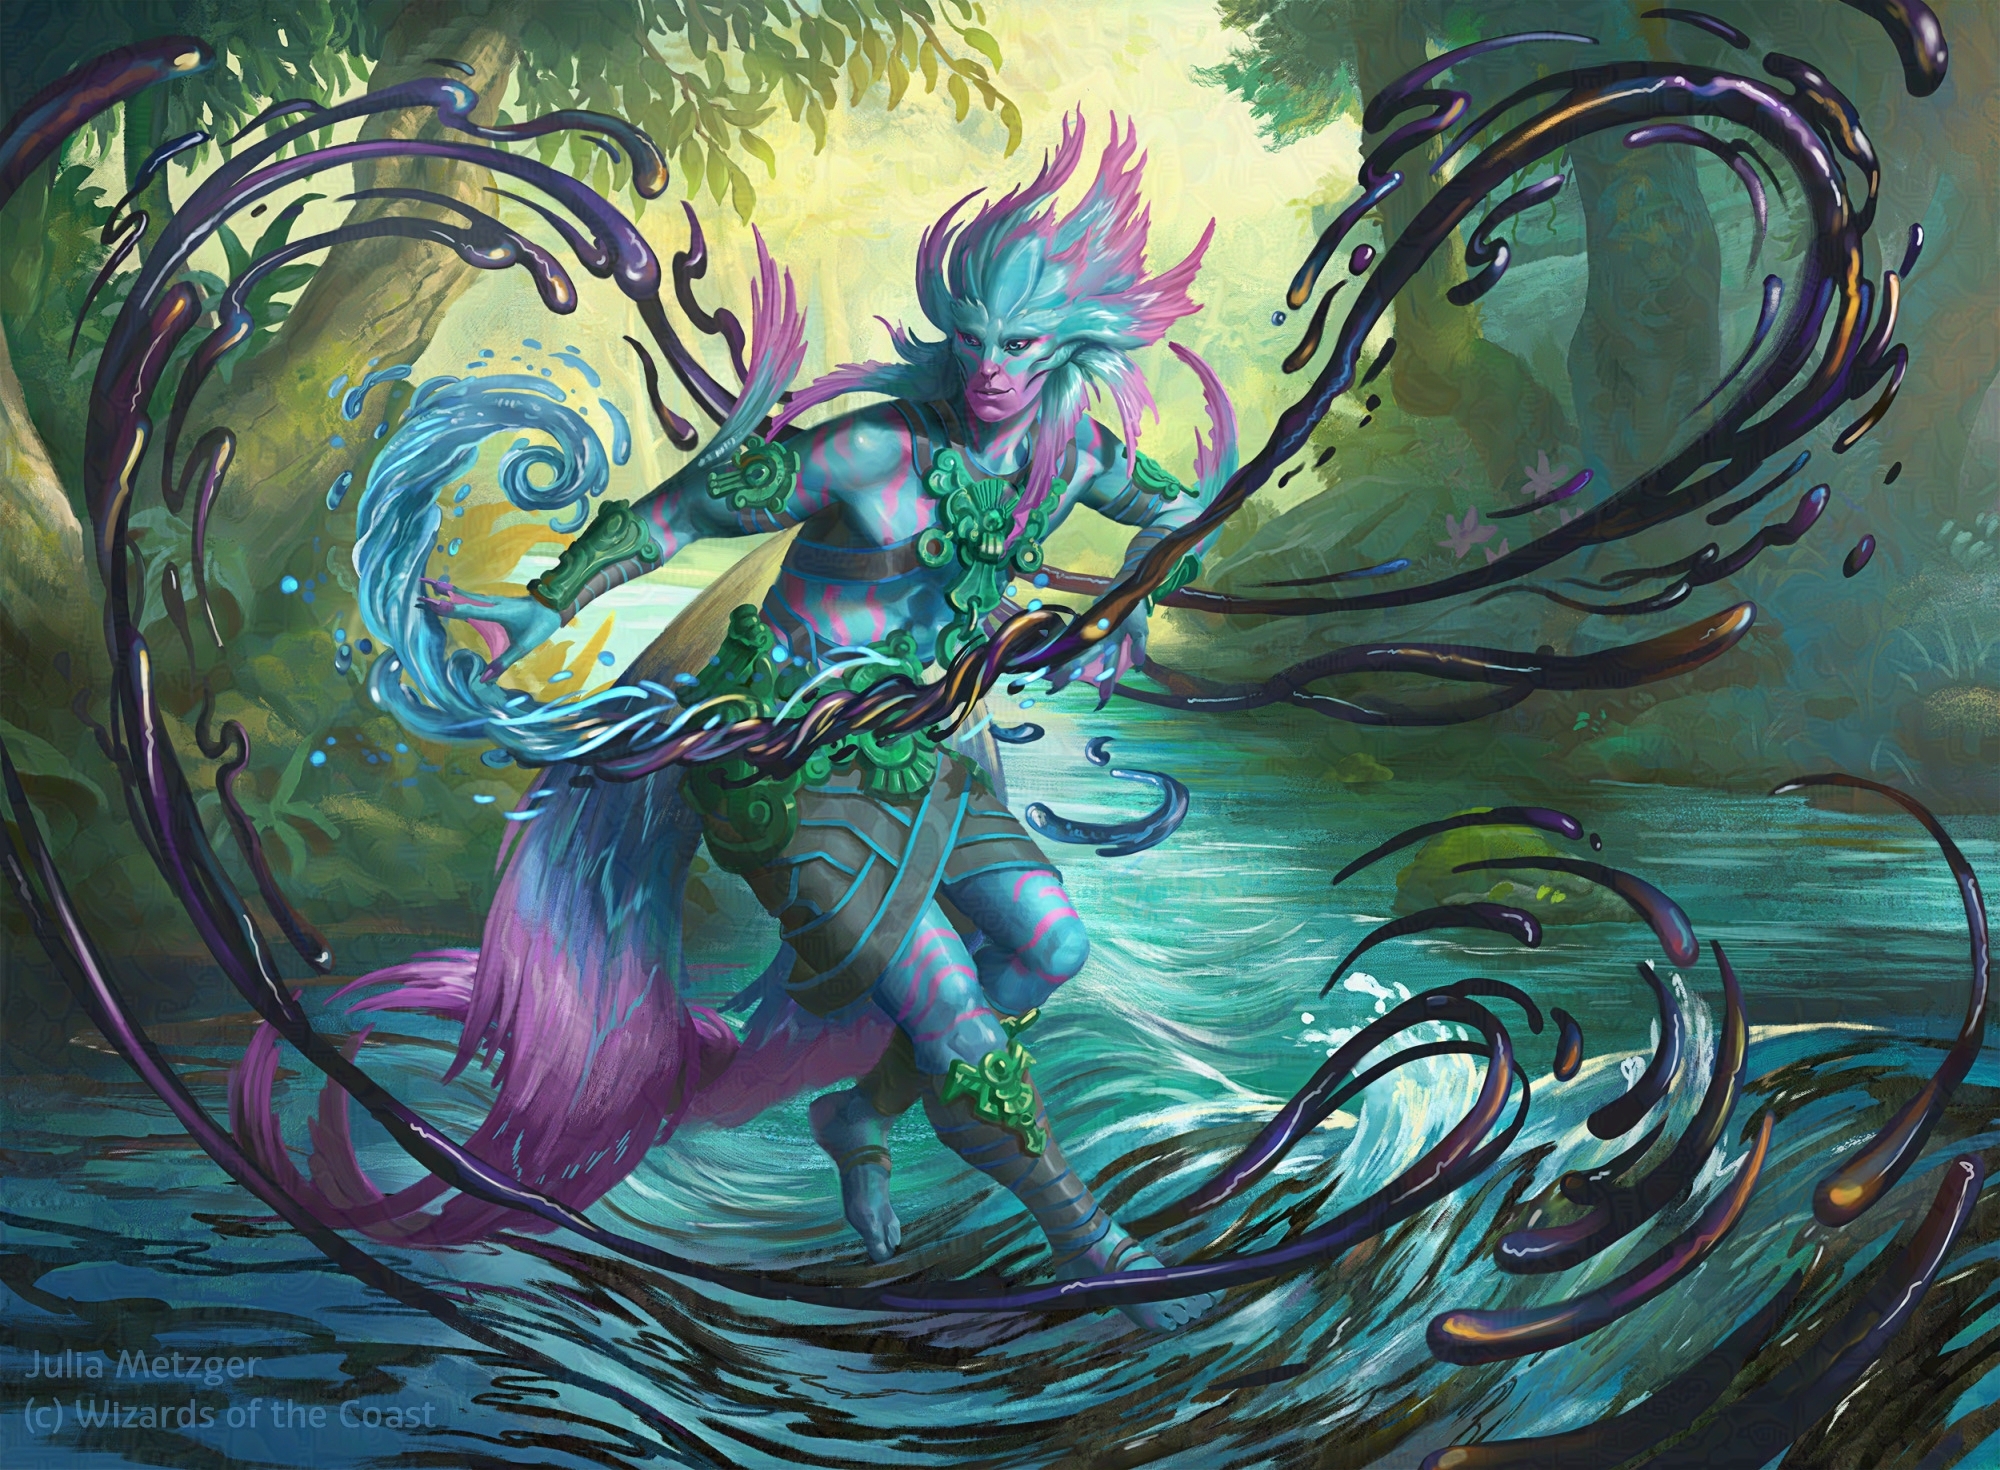 NoAi, an Ixalan merman in a dance like pose above the water of a river, filtering oil out